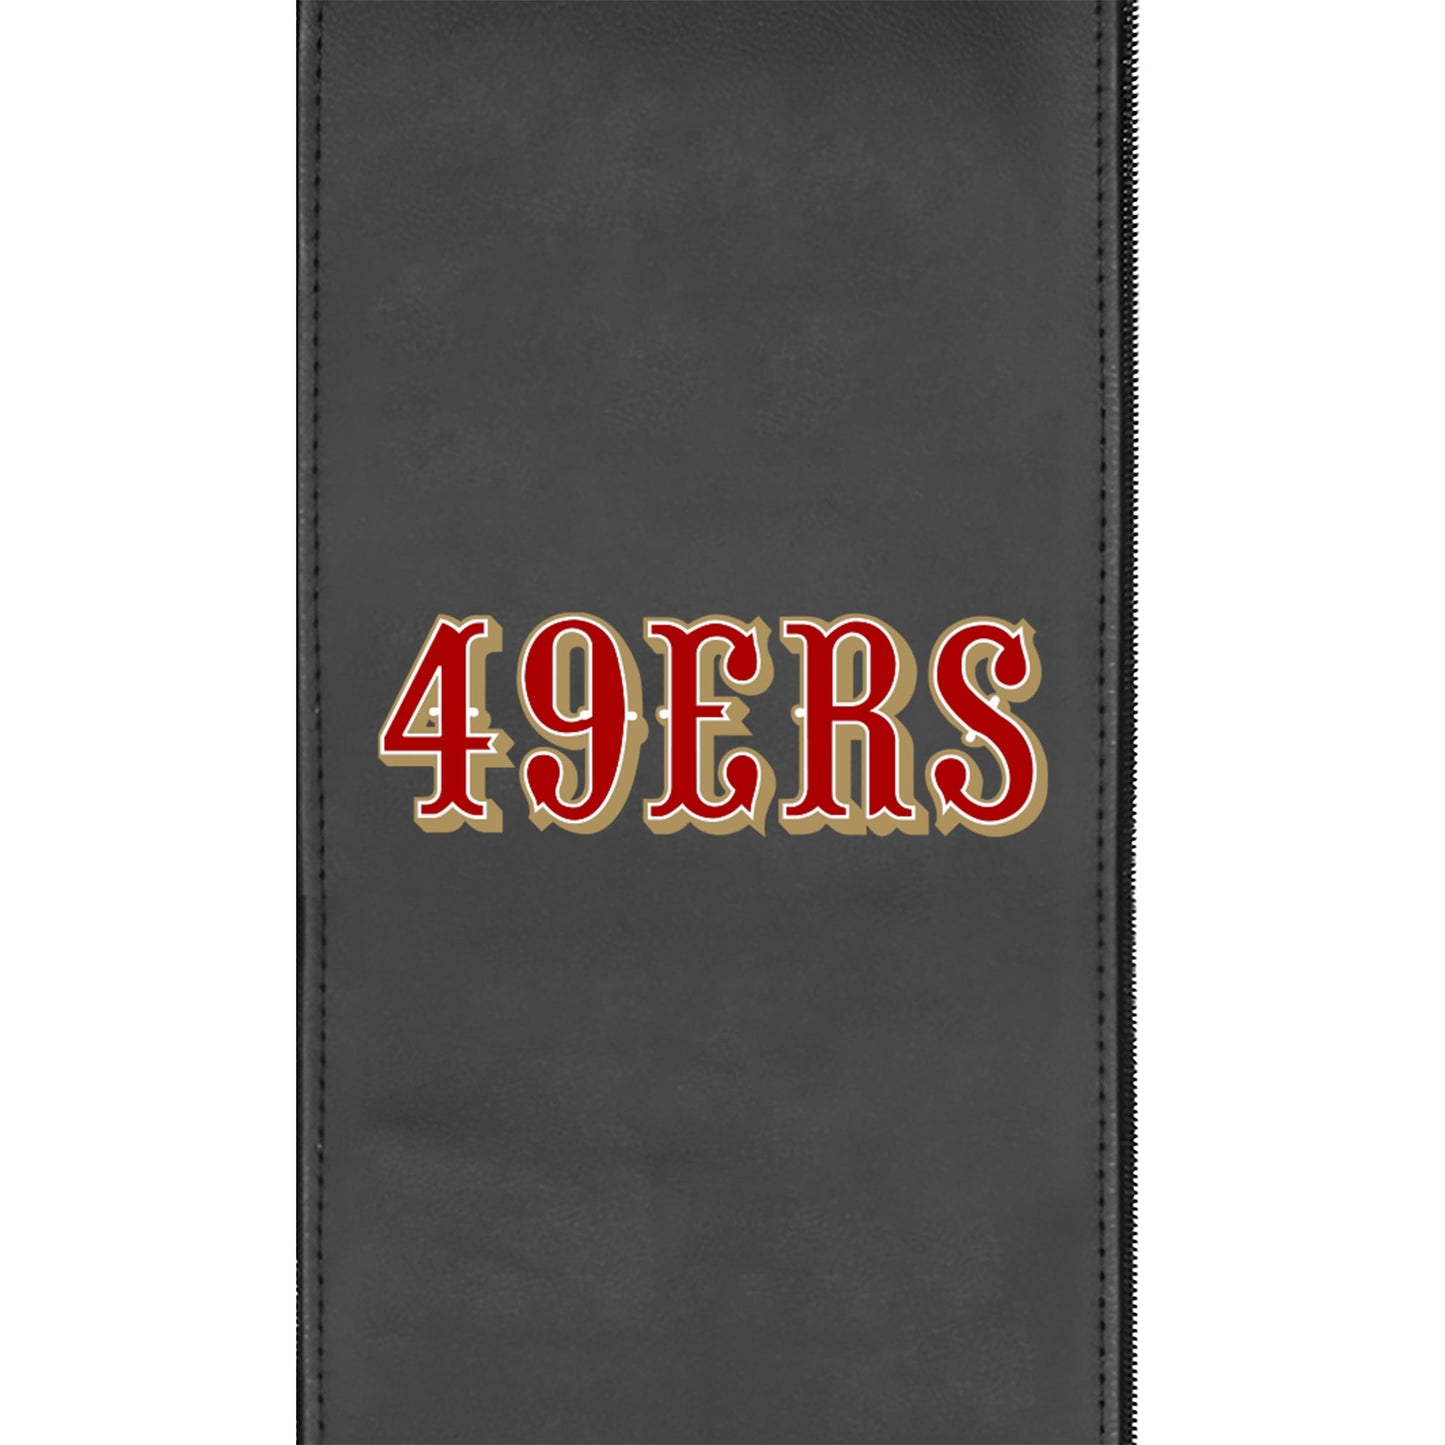 Relax Home Theater Recliner with  San Francisco 49ers Secondary Logo